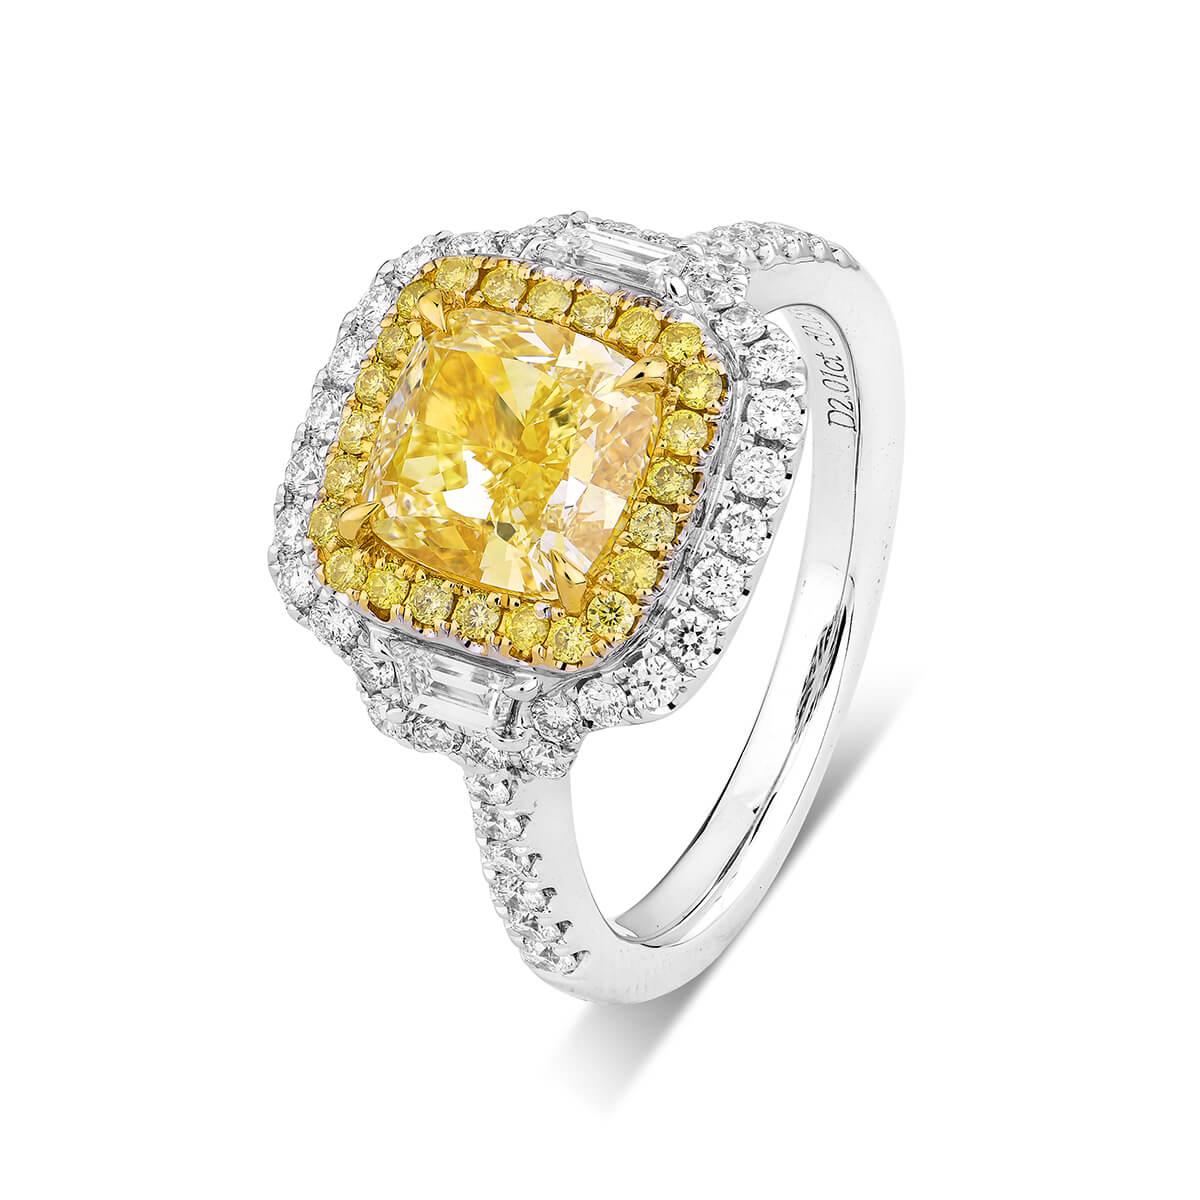 Natural Untreated Light Yellow Diamond ring surrounded by natural white diamonds making up a total carat weight of 2.75. Cushion Shape. This piece has been expertly crafted using 18 Karat White Gold. GIA certified. 
This piece can be resized